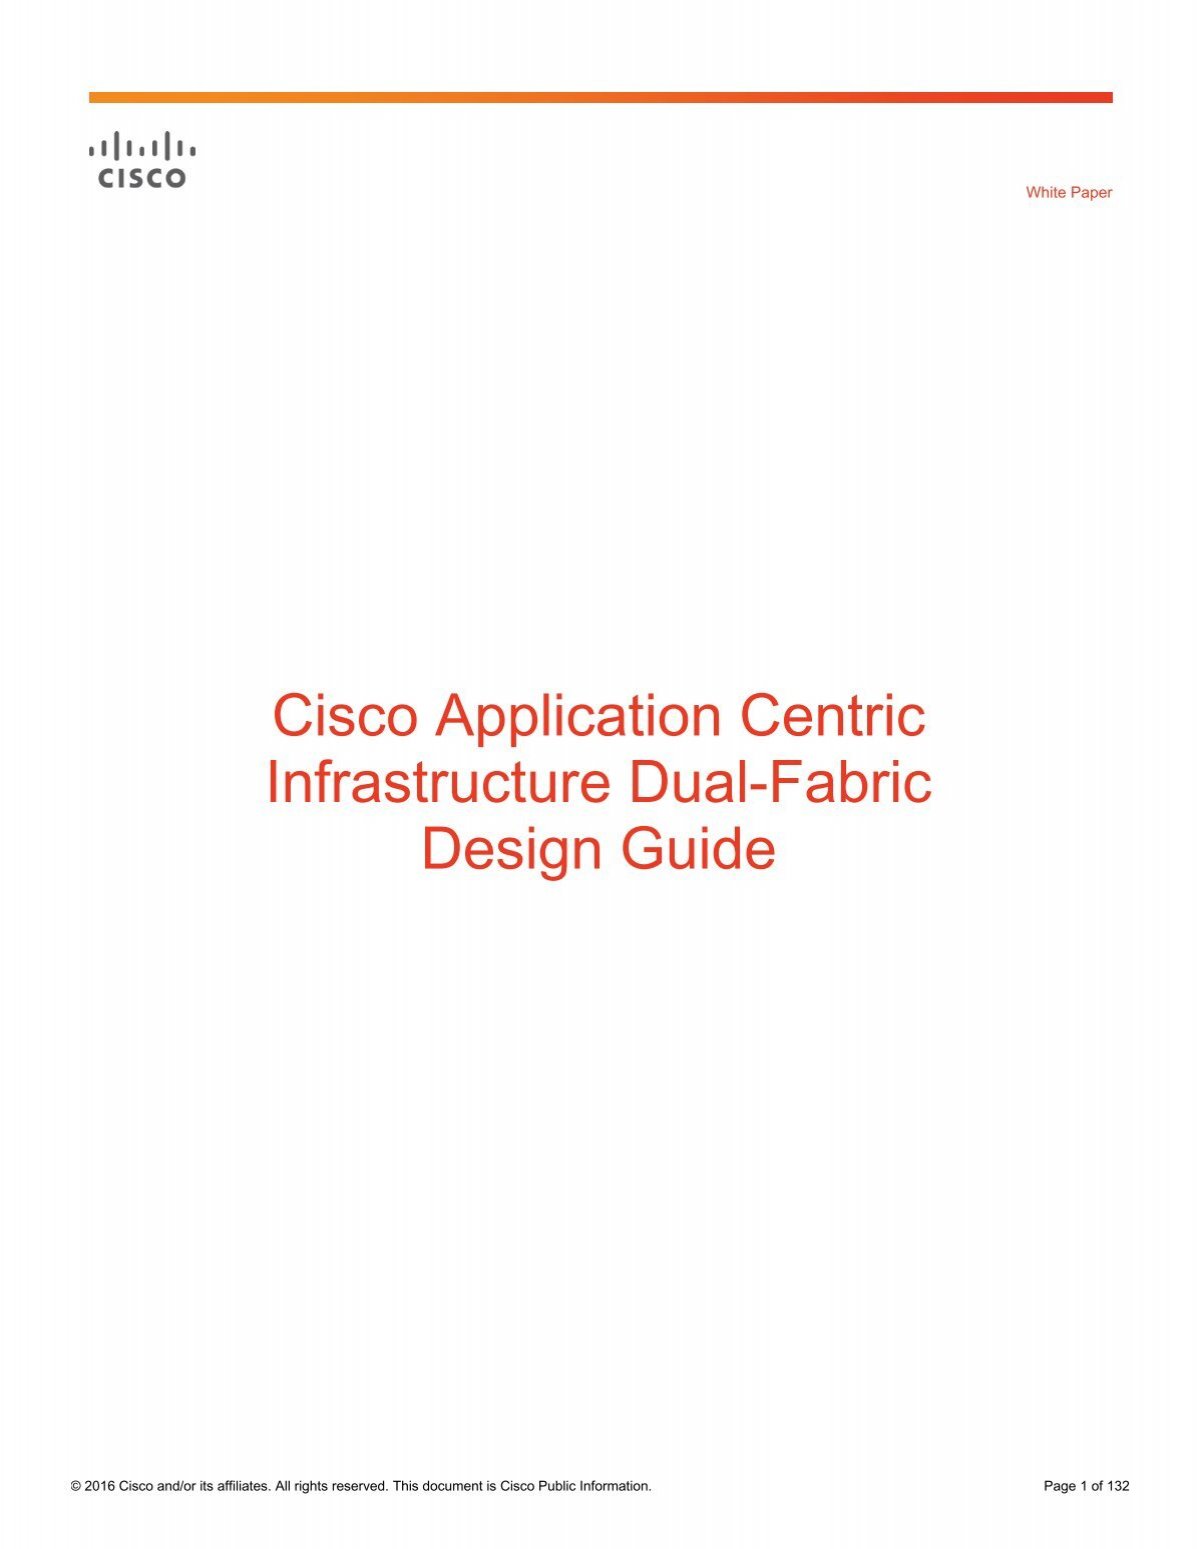 Cisco Application Centric Infrastructure Dual-Fabric Design Guide